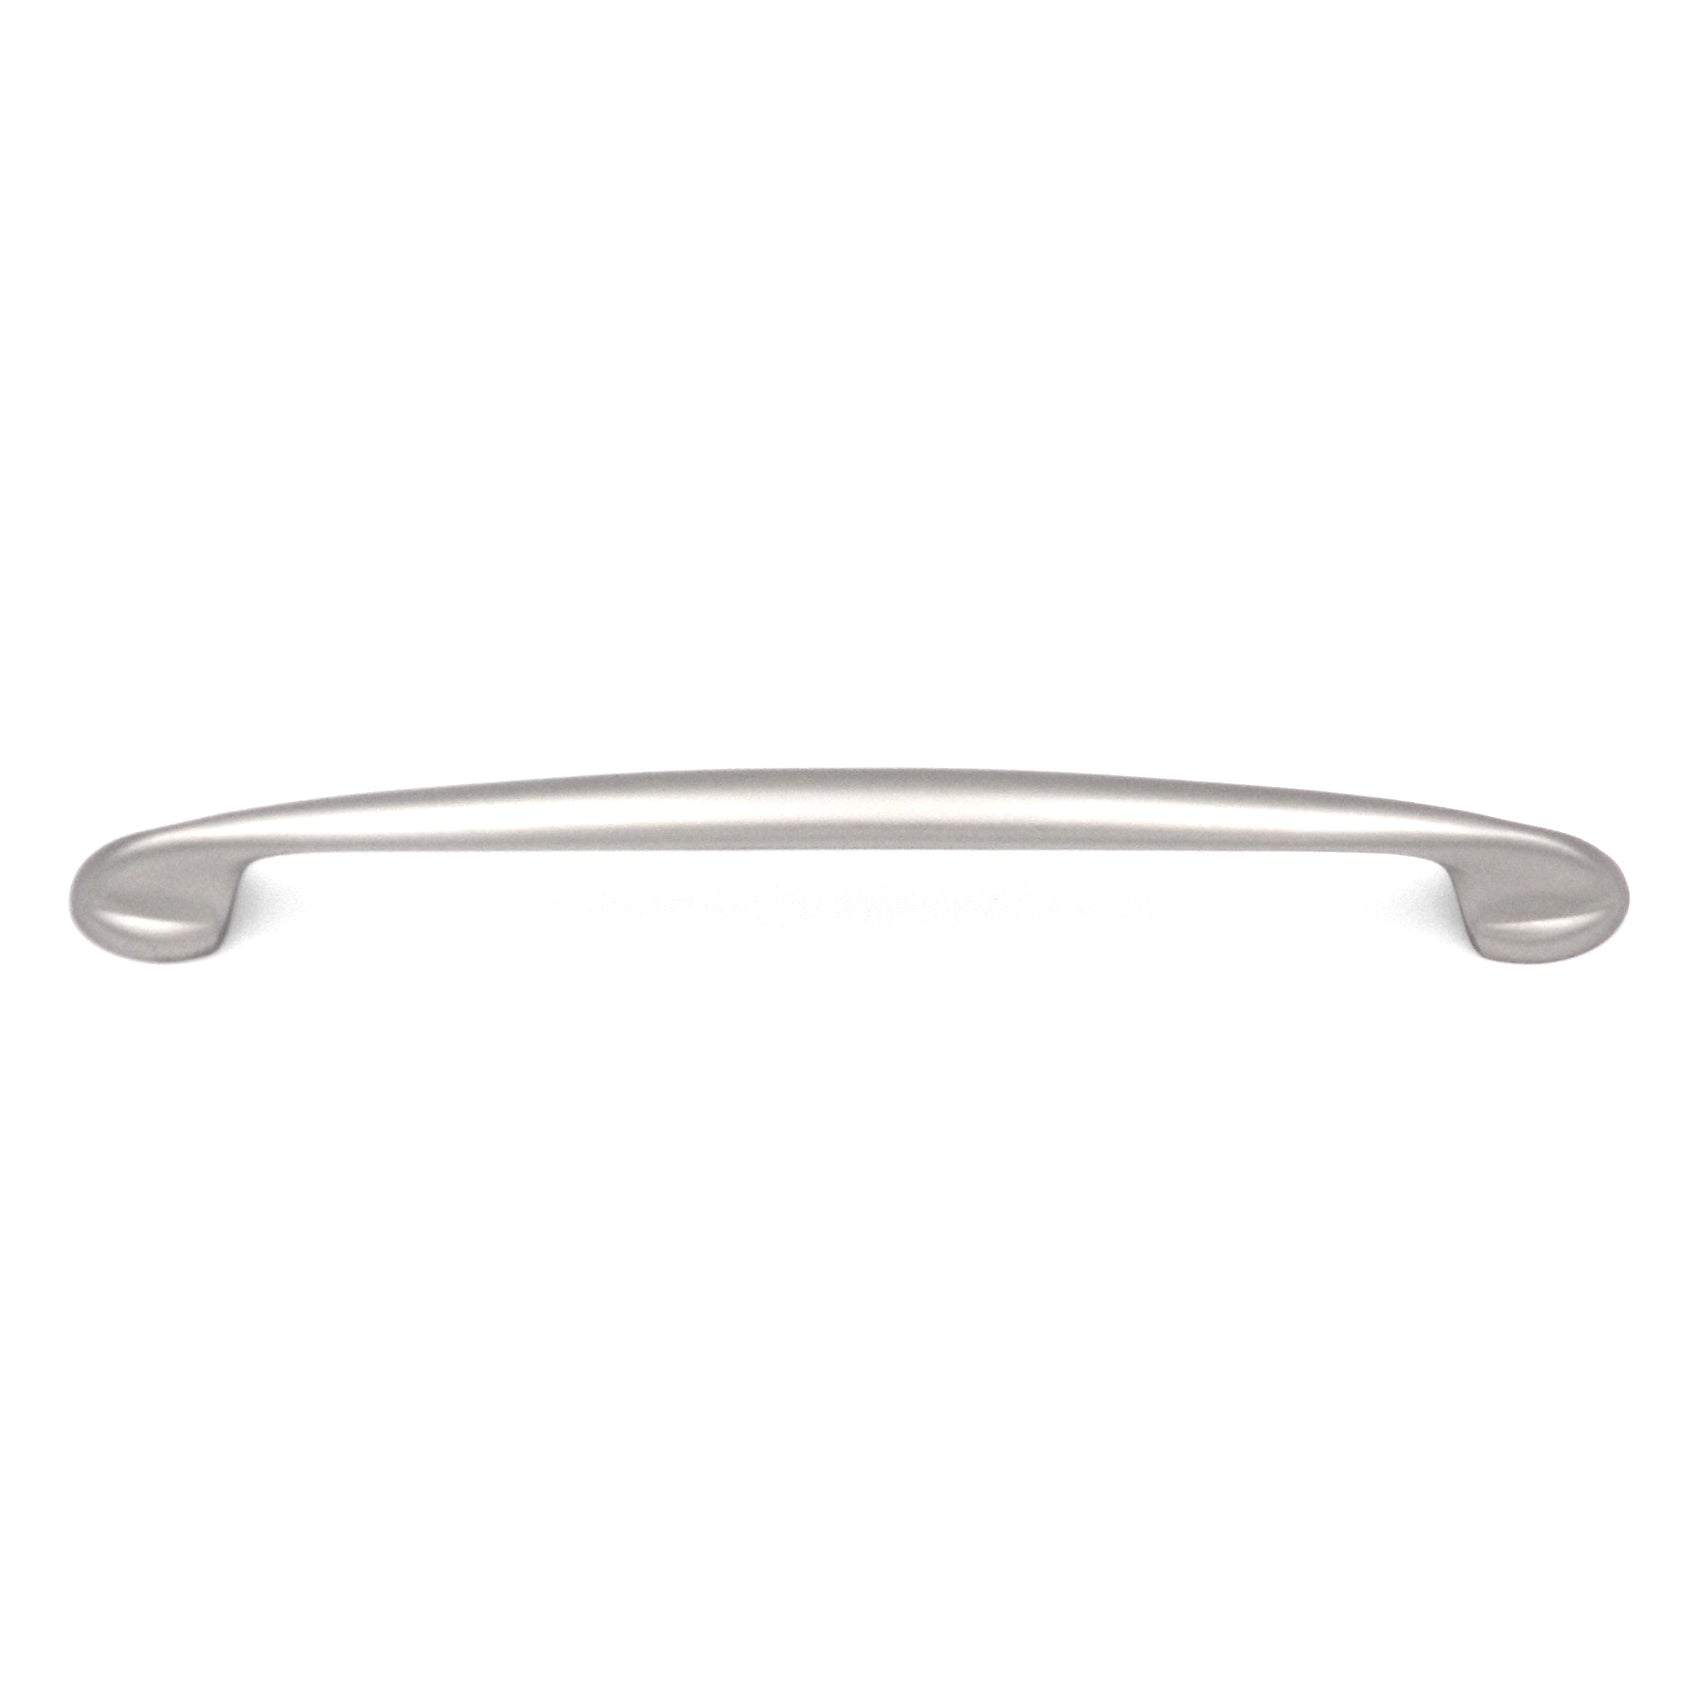 10 Pack Hickory Altair P3080-FN Flat Nickel 6 1/4" (160mm)cc Arch Cabinet Handle Pull